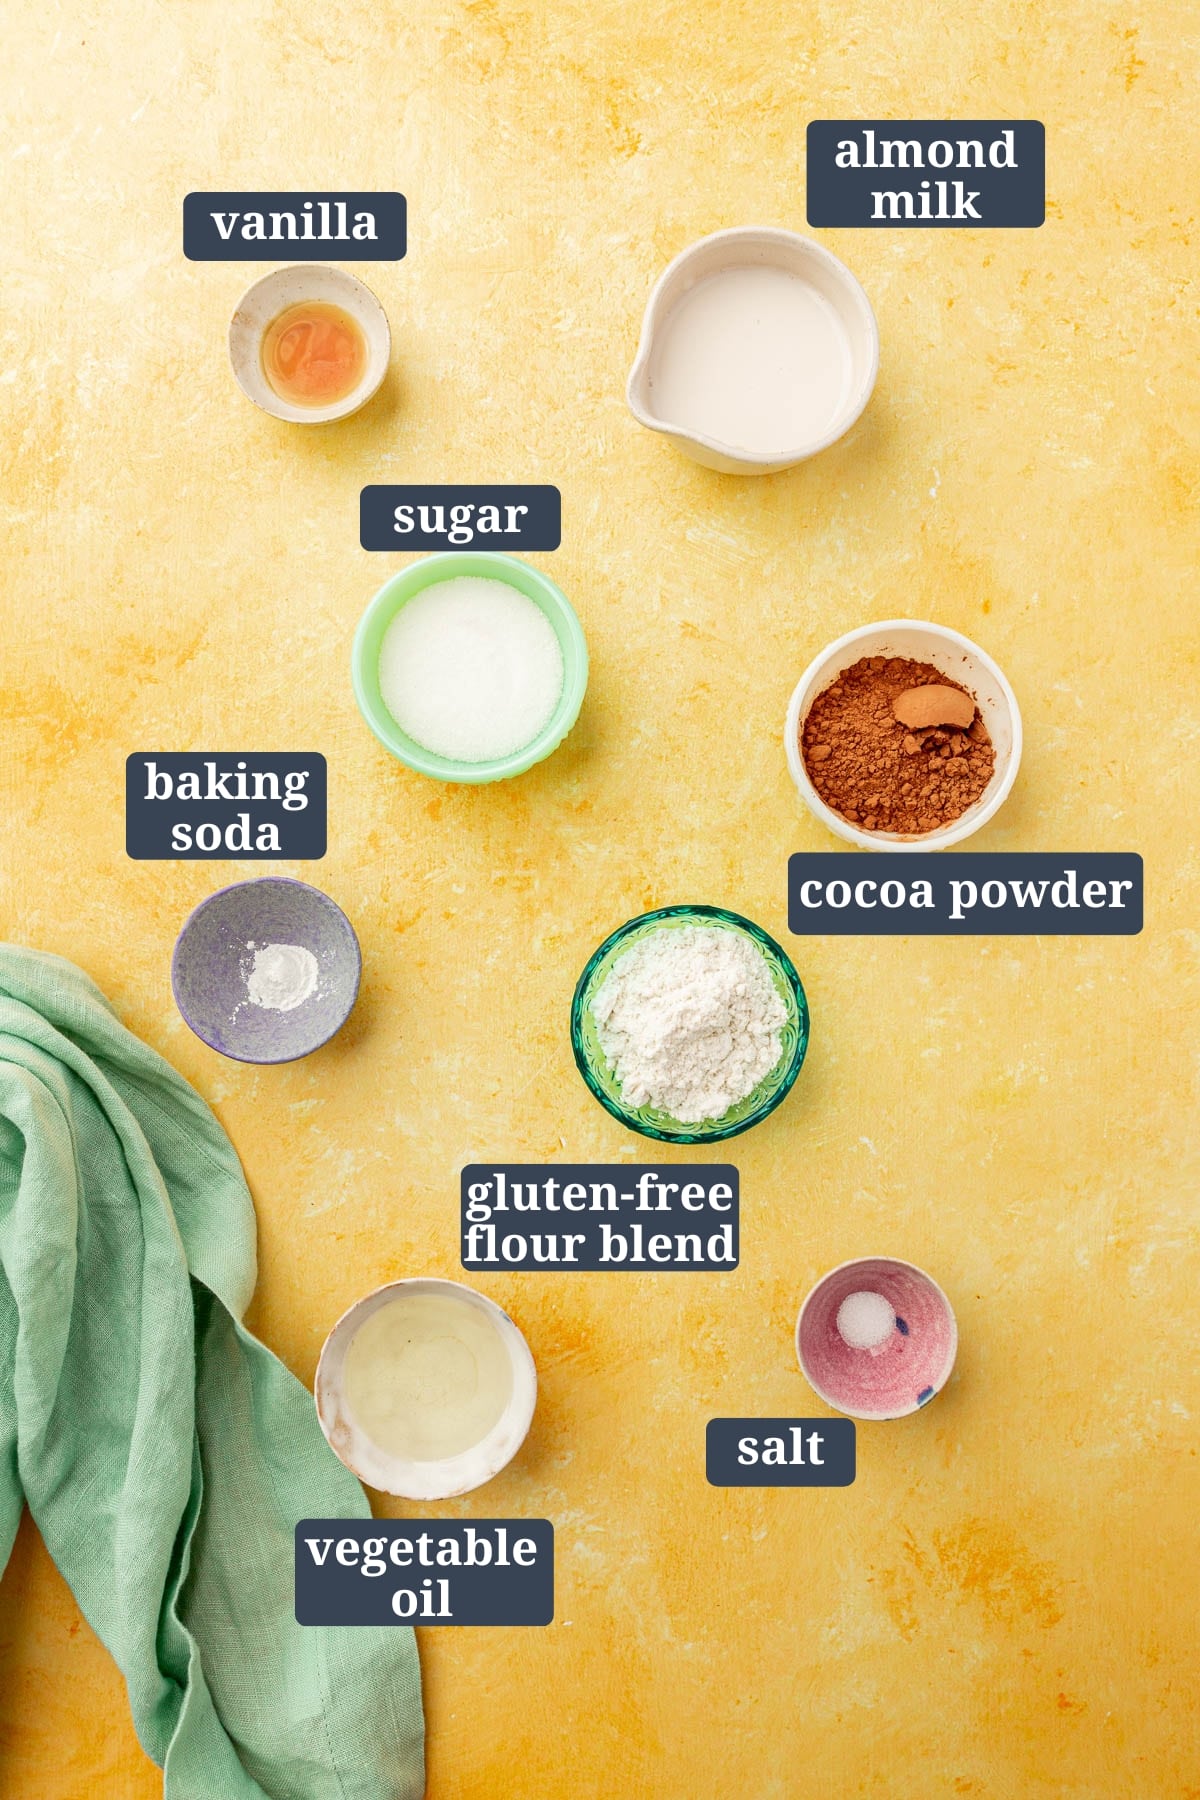 Ingredients in small colorful bowls to make a gluten-free chocolate mug cake, including cocoa powder, oil, sugar, gluten-free flour, baking soda, vanilla, almond milk with text overlays over each ingredient.